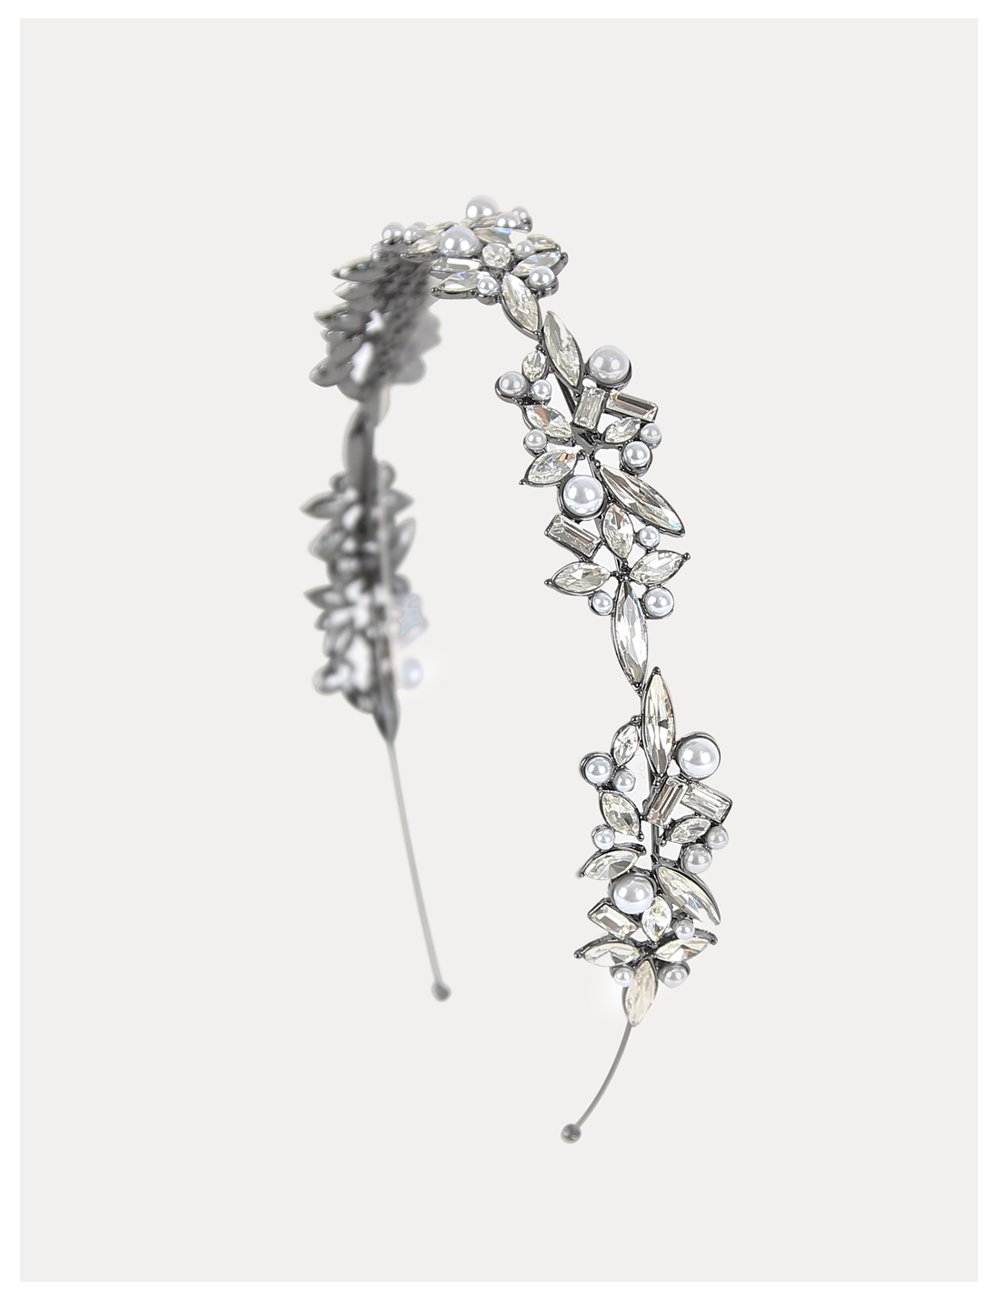 Bright frost Hairband